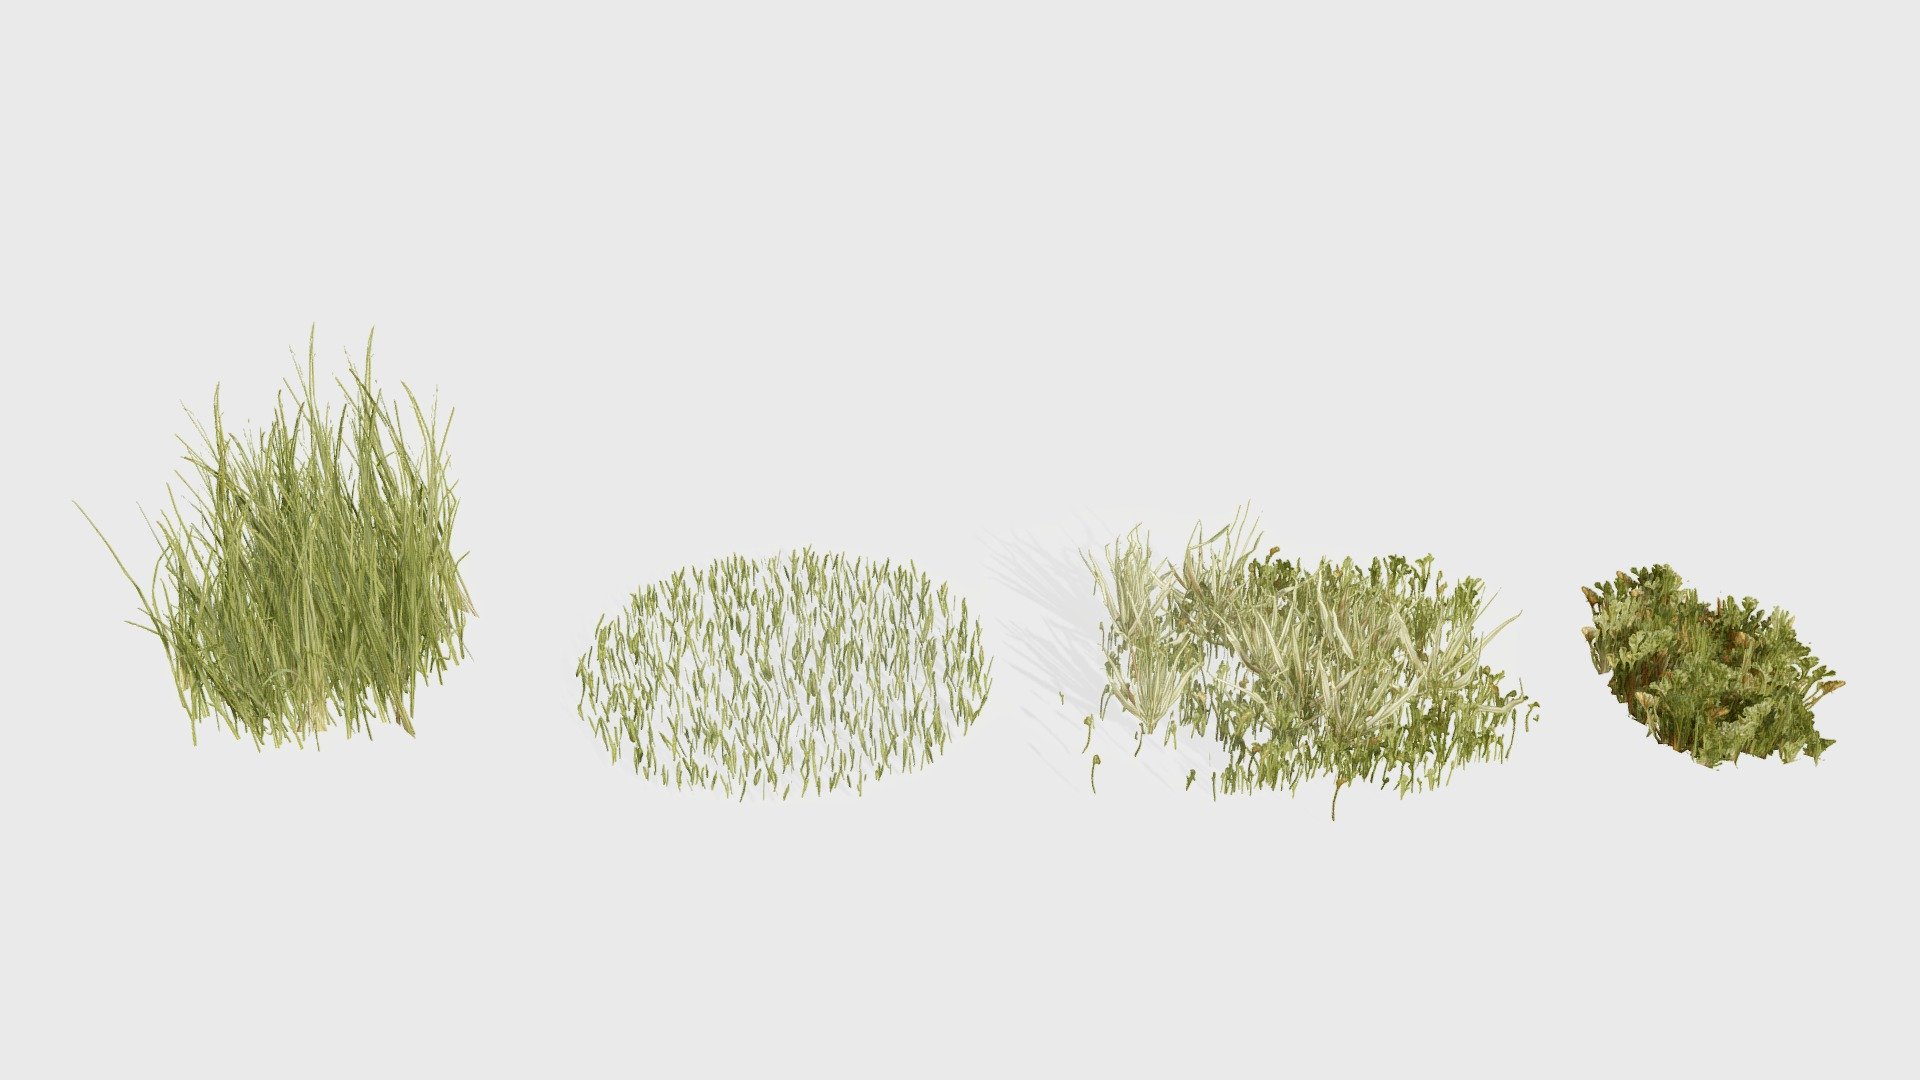 Check out my website for more products and better deals! &amp;gt;&amp;gt; SM5 by Heledahn &amp;lt;&amp;lt;


This is a digital 3d model of a grass pack, consisting of four grass patches: Bear Grass, Short Grass, Poppy Grass, and Long Grass &amp; Poppy.

The grass is made out of mesh cards with a transparency shader. Perfect for real-time renders.

This product will achieve realistic results in your rendering projects, being greatly suited for close-ups due to their high quality topology and PBR shading 3d model